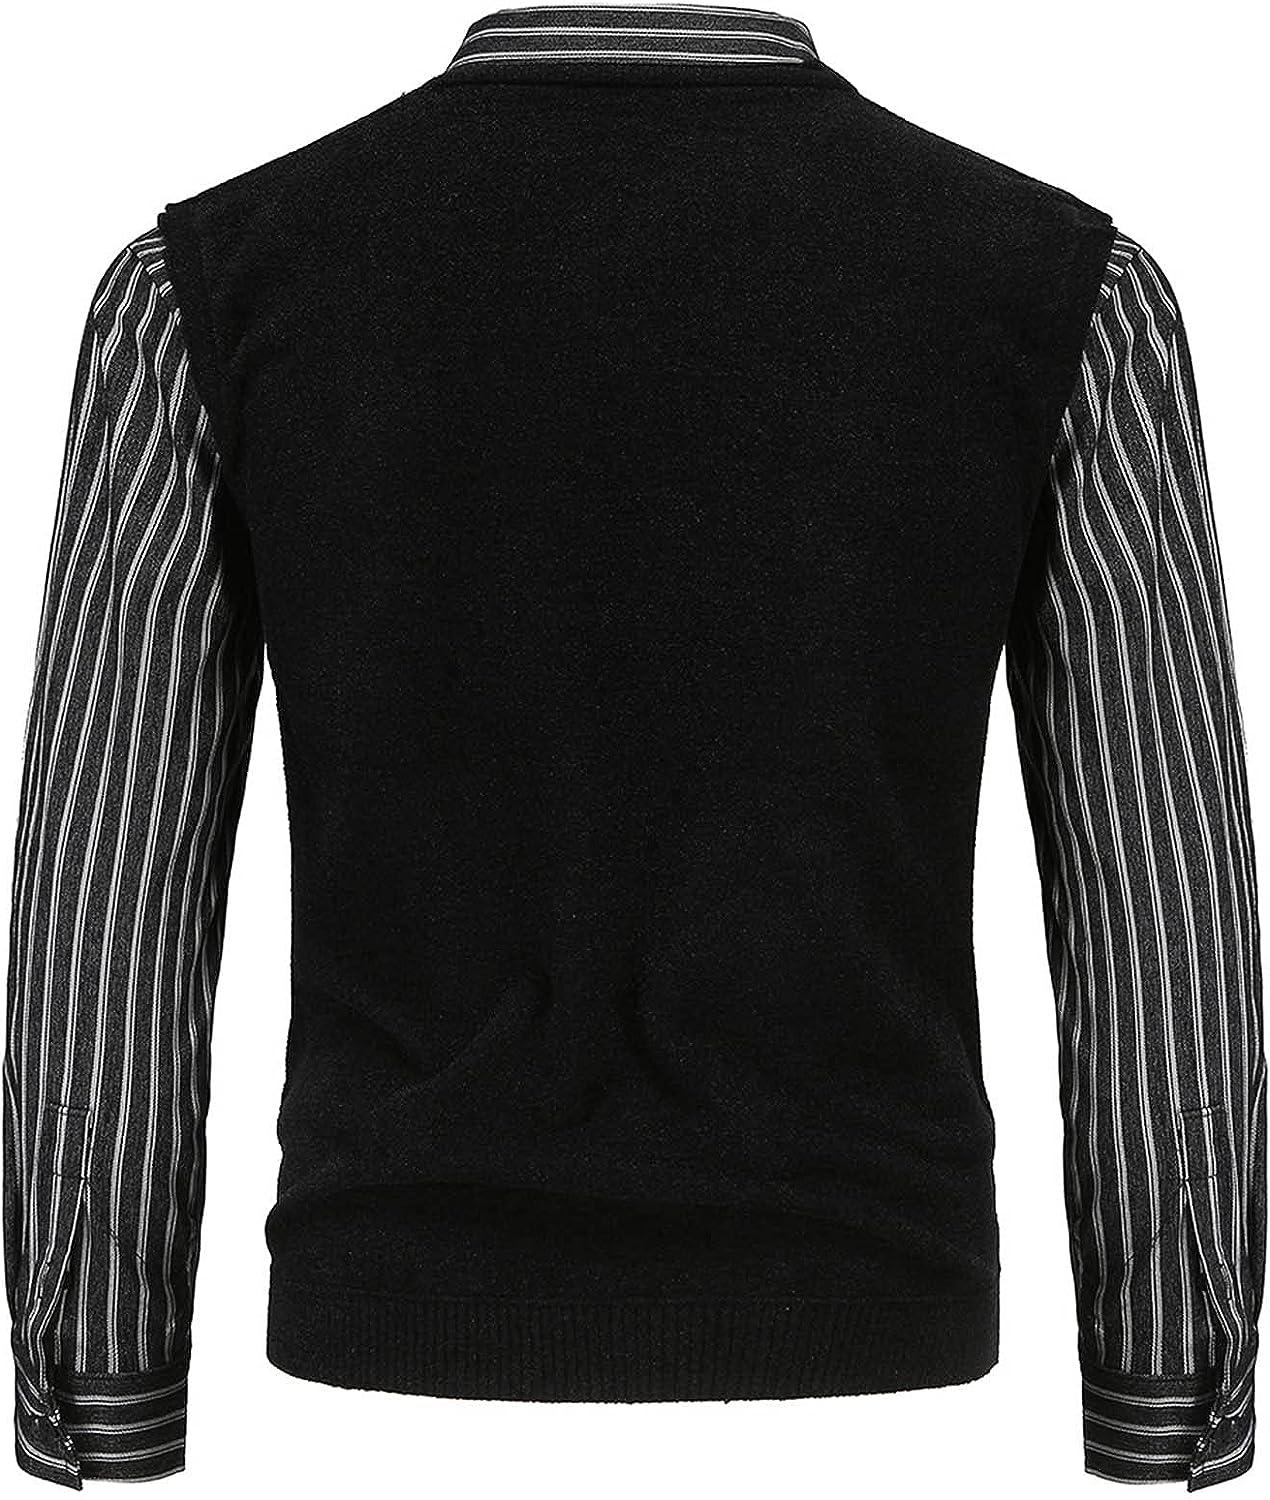 GXLONG Men's Fake Two Piece Striped Pullover Sweater Knitted